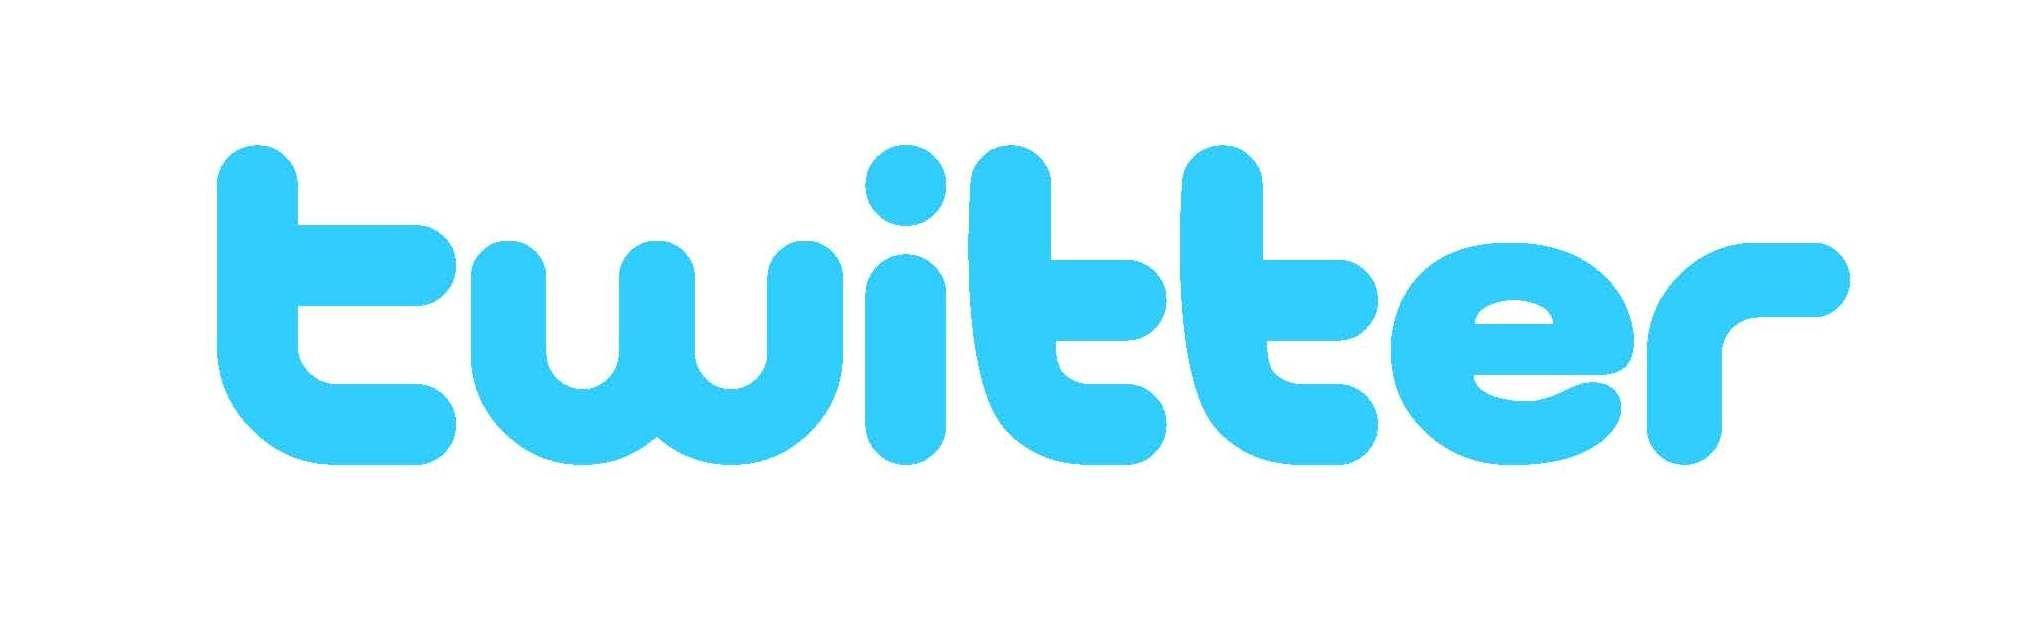 Twitter.com Logo - Twitter Chat: A quick guide for beginners. Escape Travel